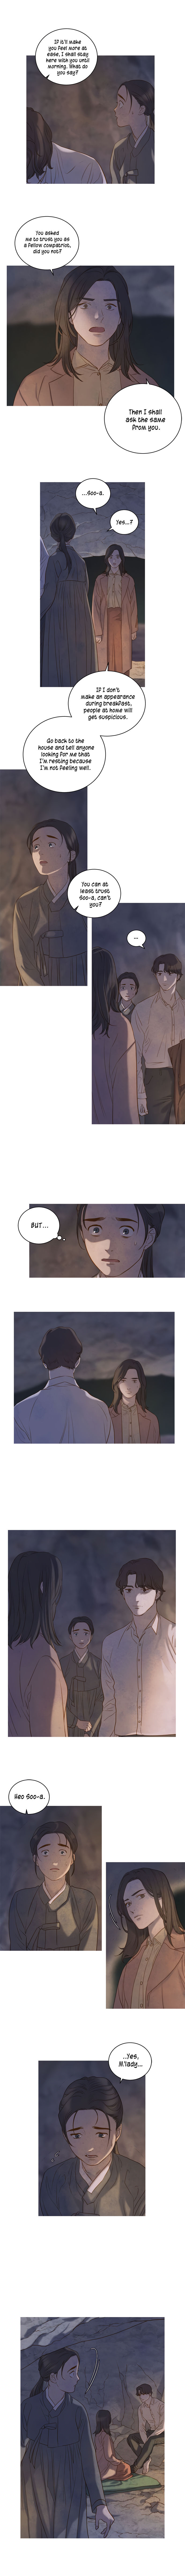 The Whale Star - The Gyeongseong Mermaid - Chapter 5 Page 6